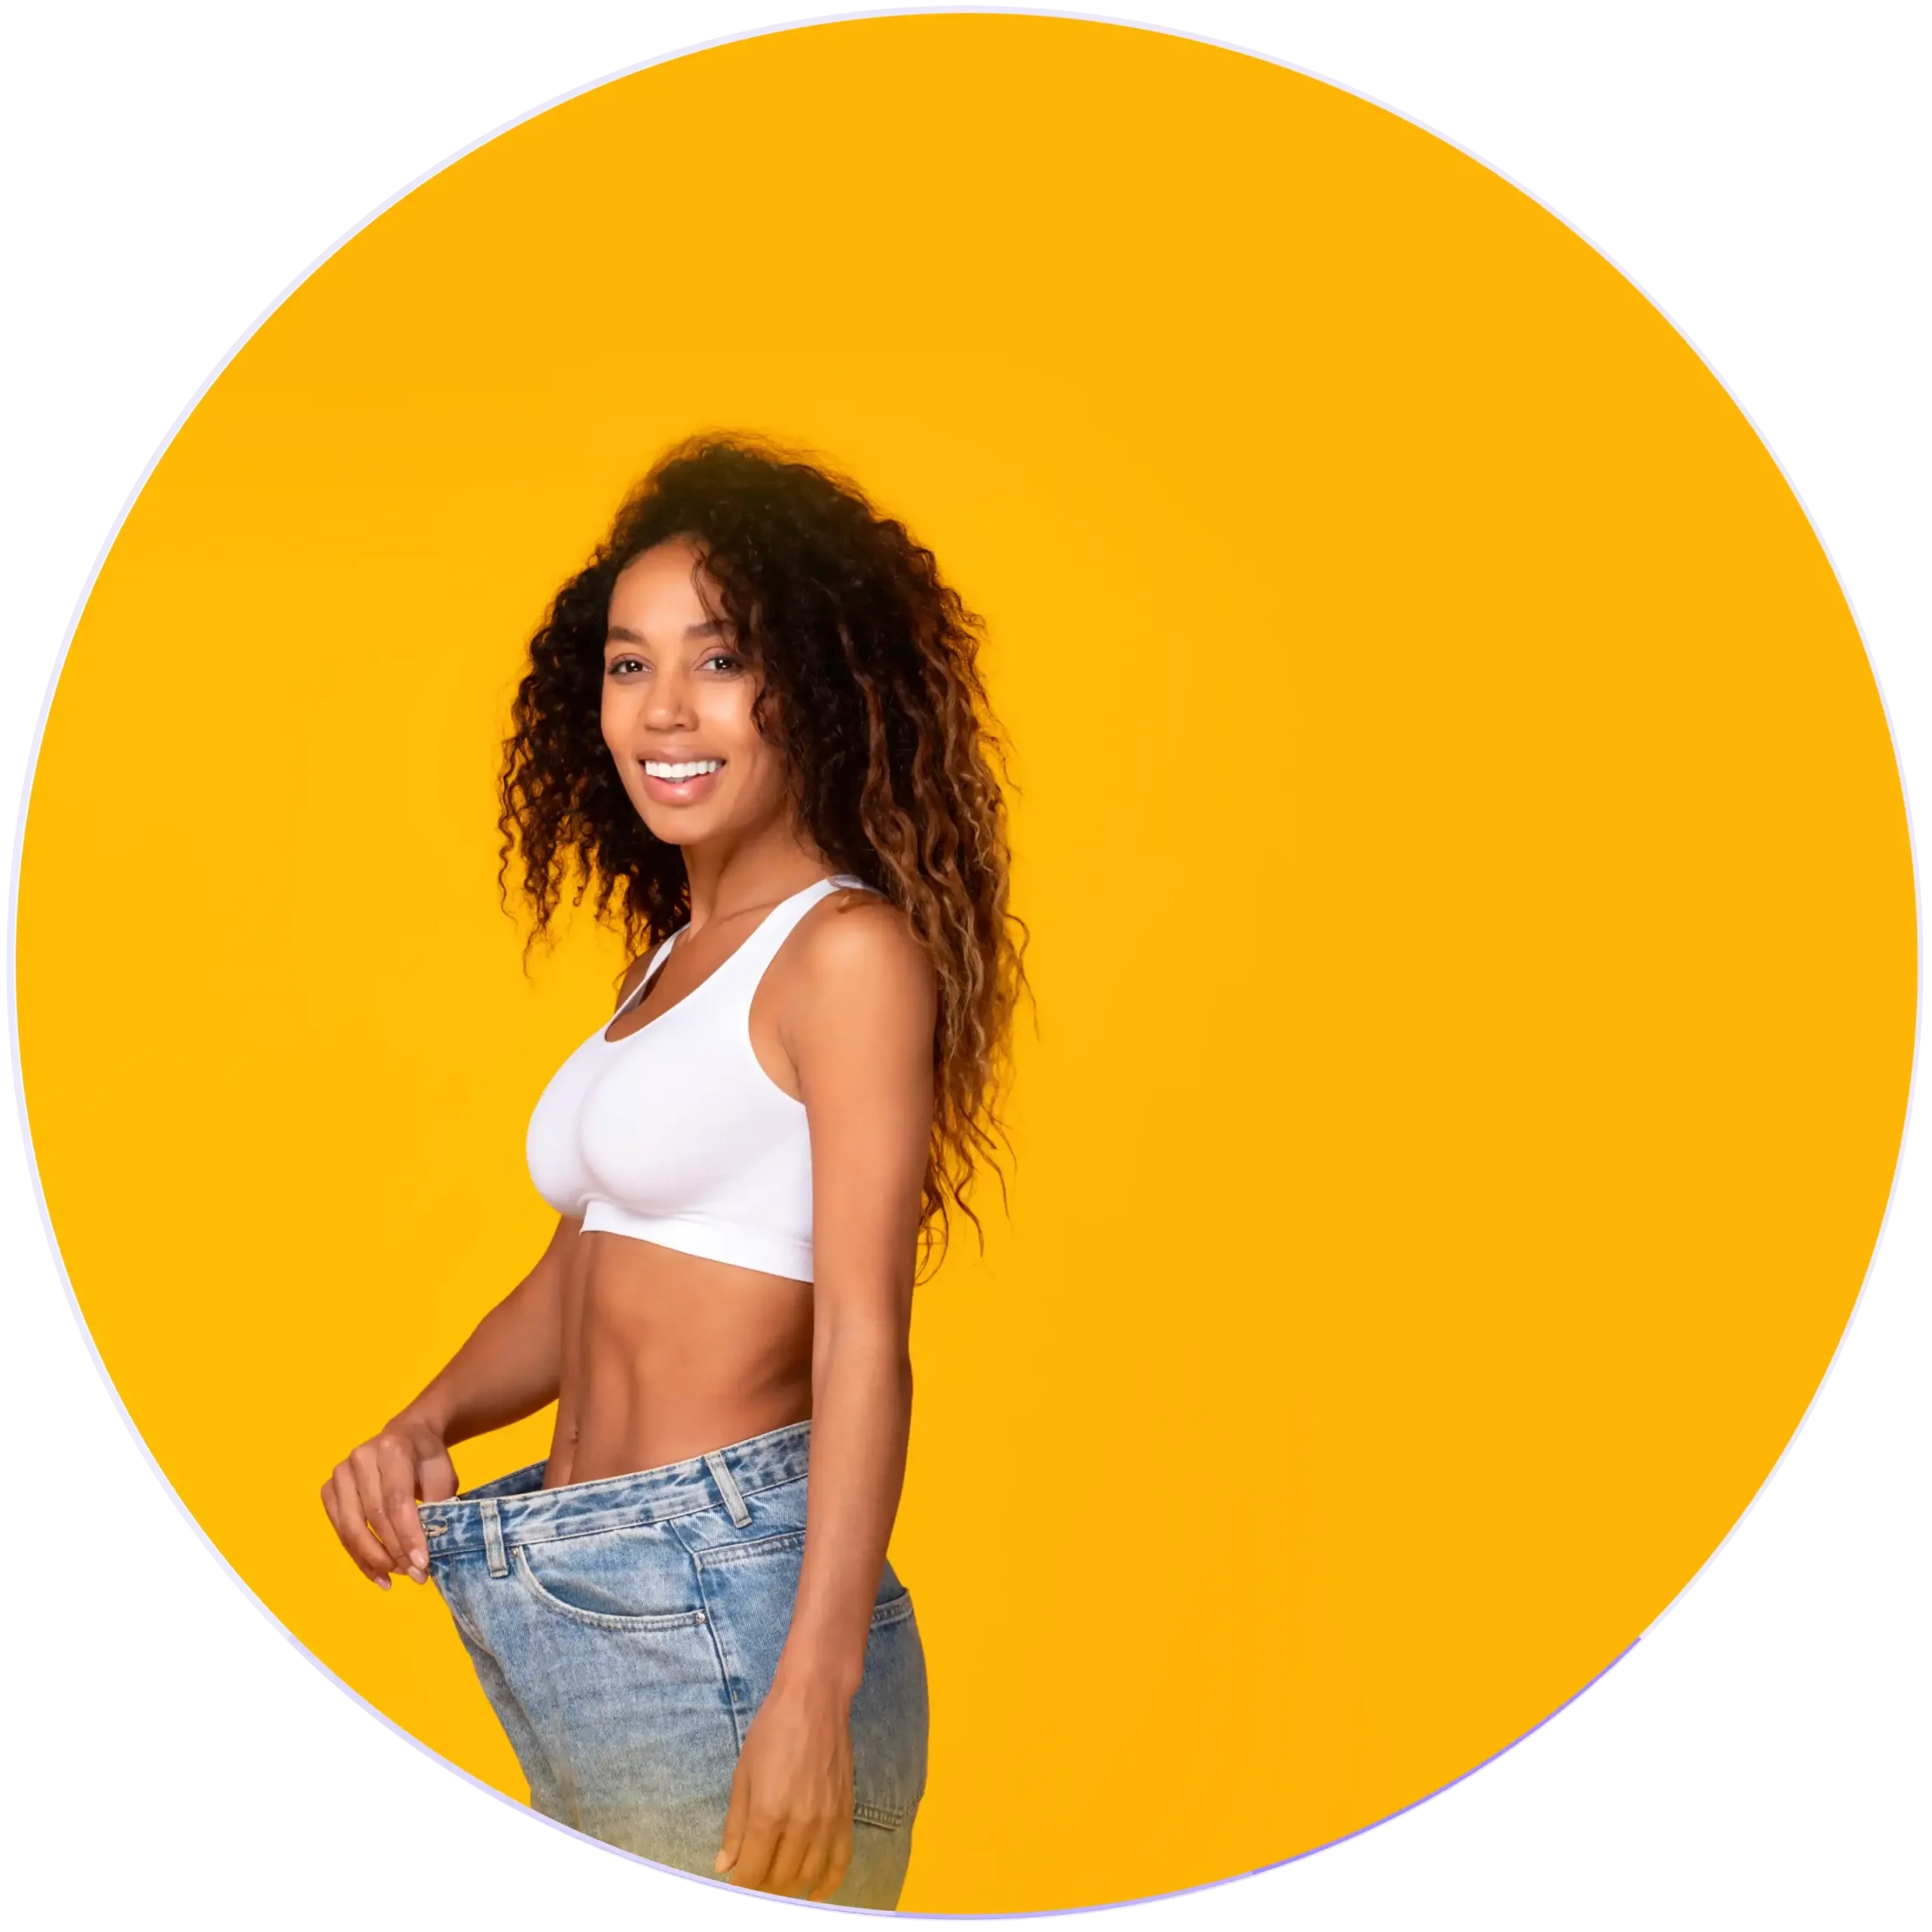 Woman demonstrating her weight loss by pulling away excess waistband on jeans against a yellow background, showcasing her diet success.